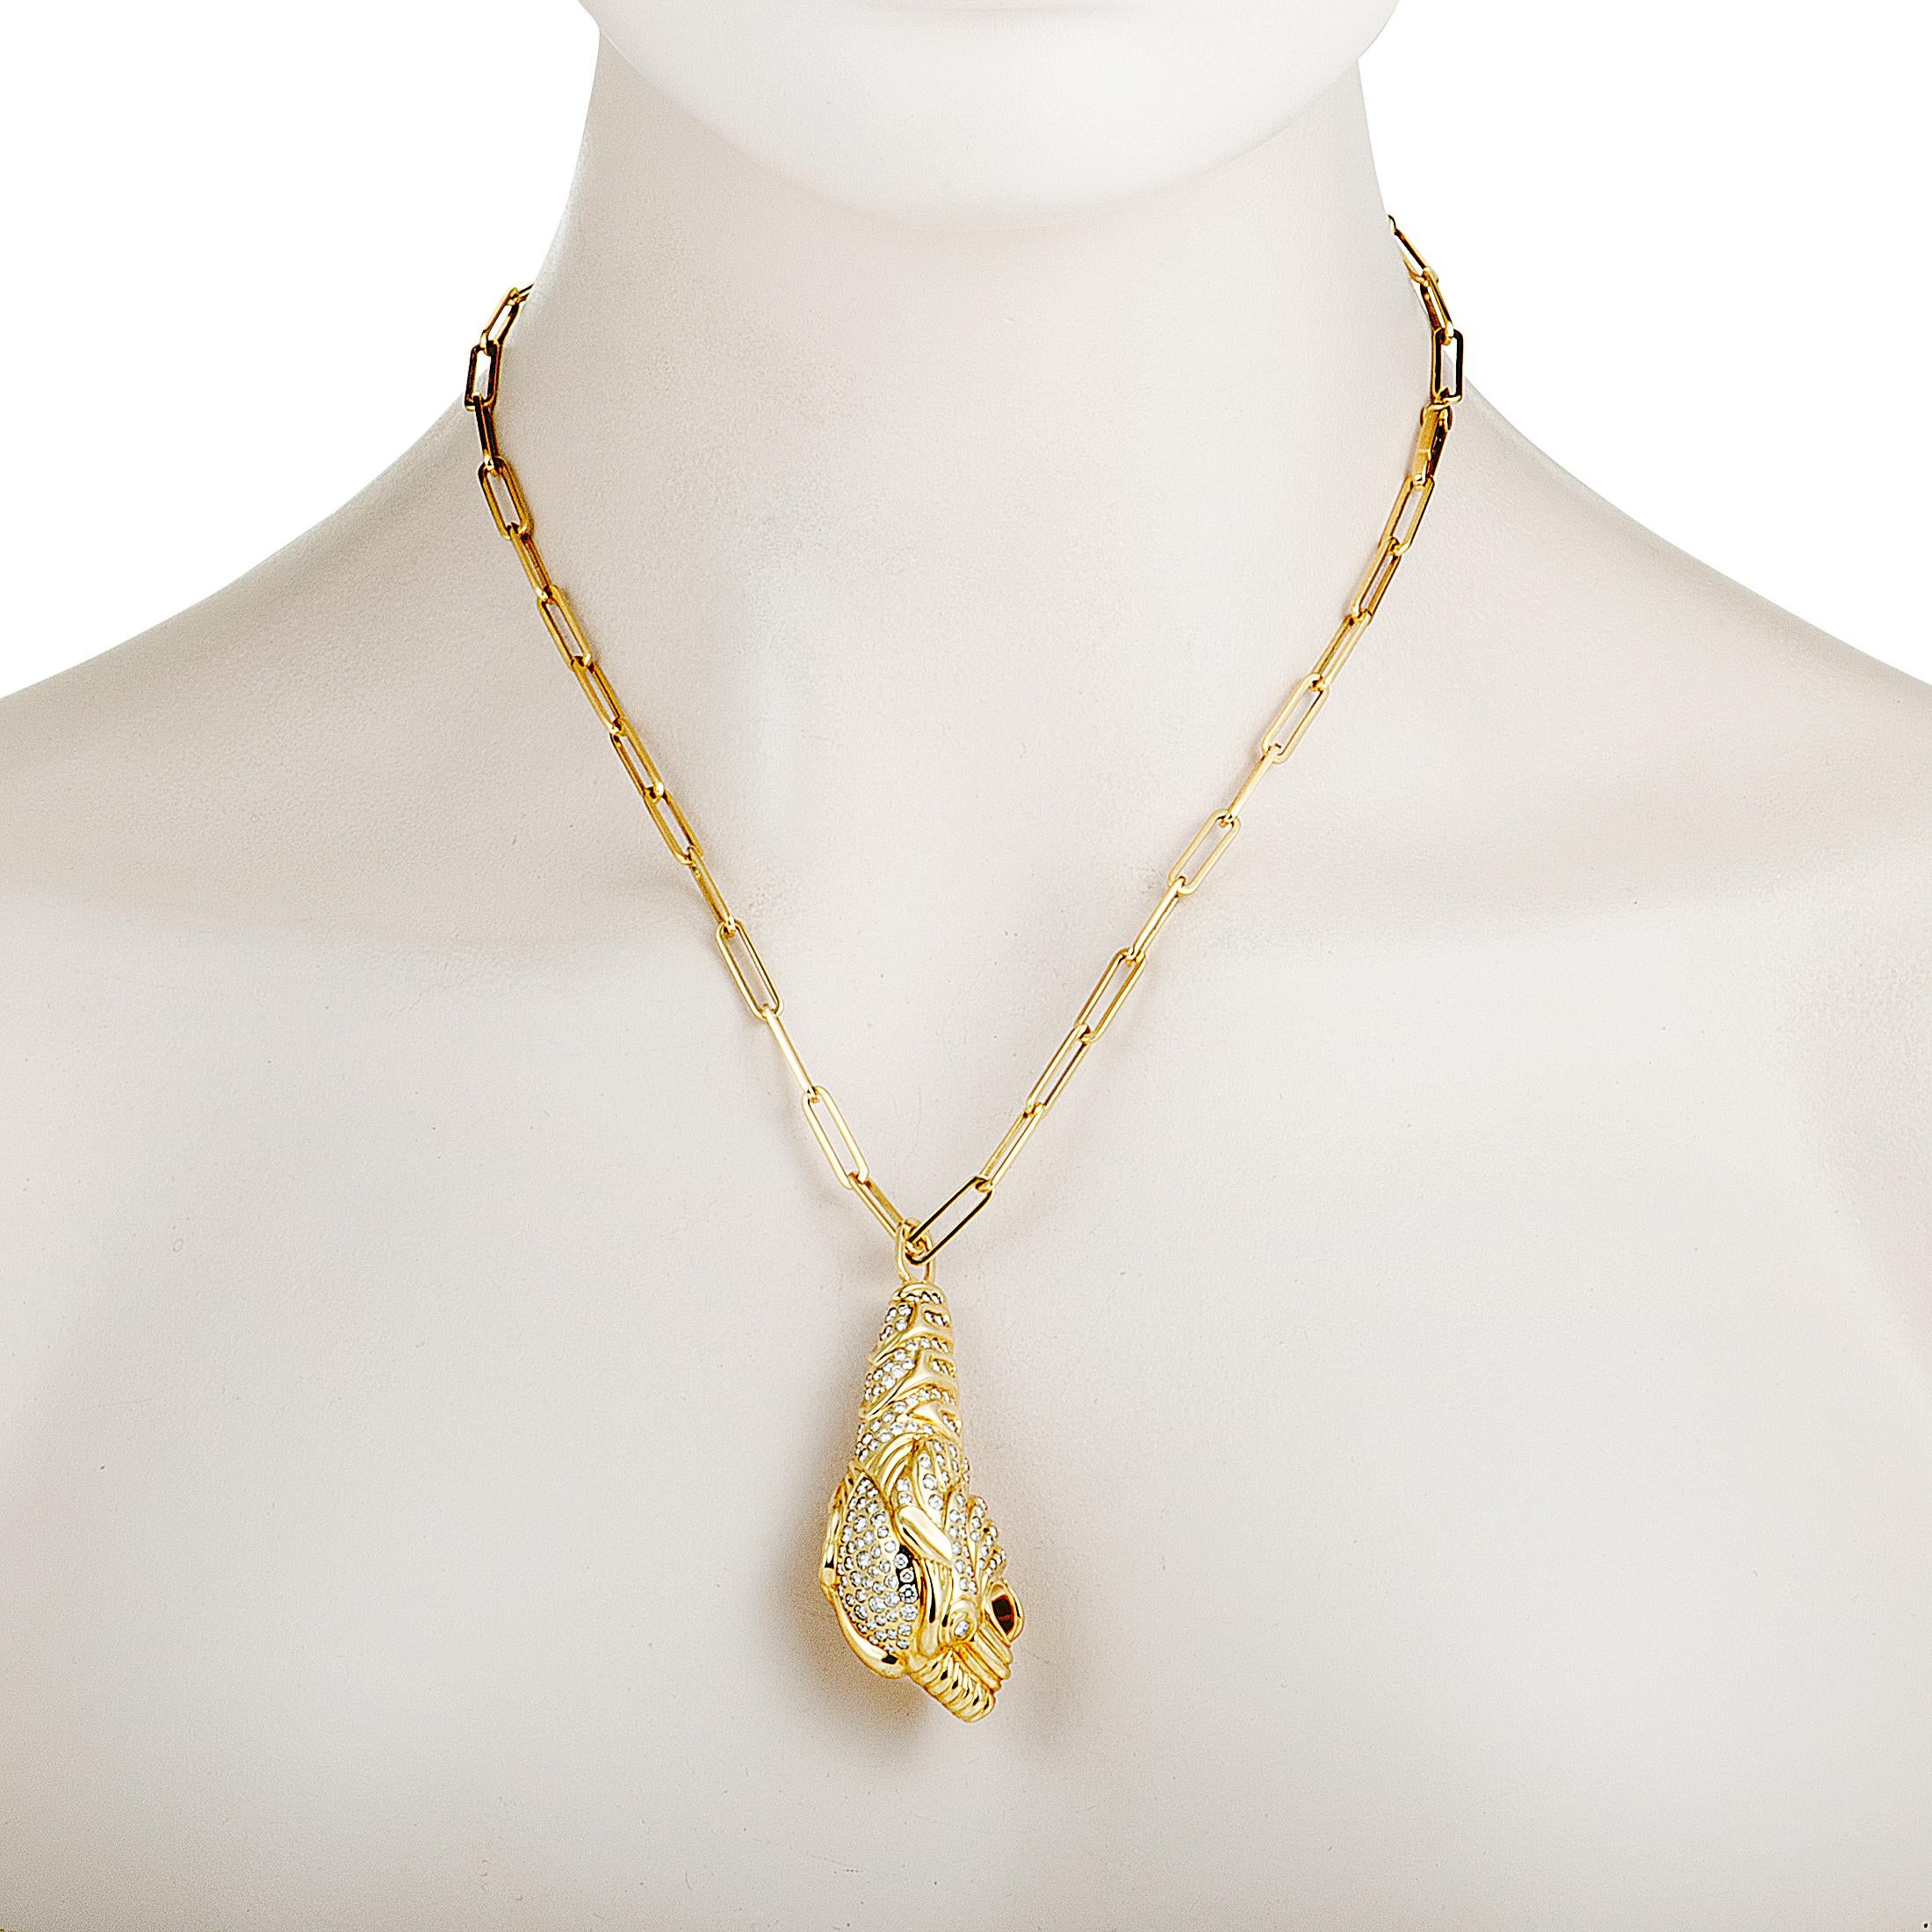 This stunning necklace designed by Gucci boasts a compelling panther pendant that is lavishly decorated with dazzling diamonds and presented on a stylish chain. The necklace is wonderfully made of radiant 18K yellow gold and it is set with a total